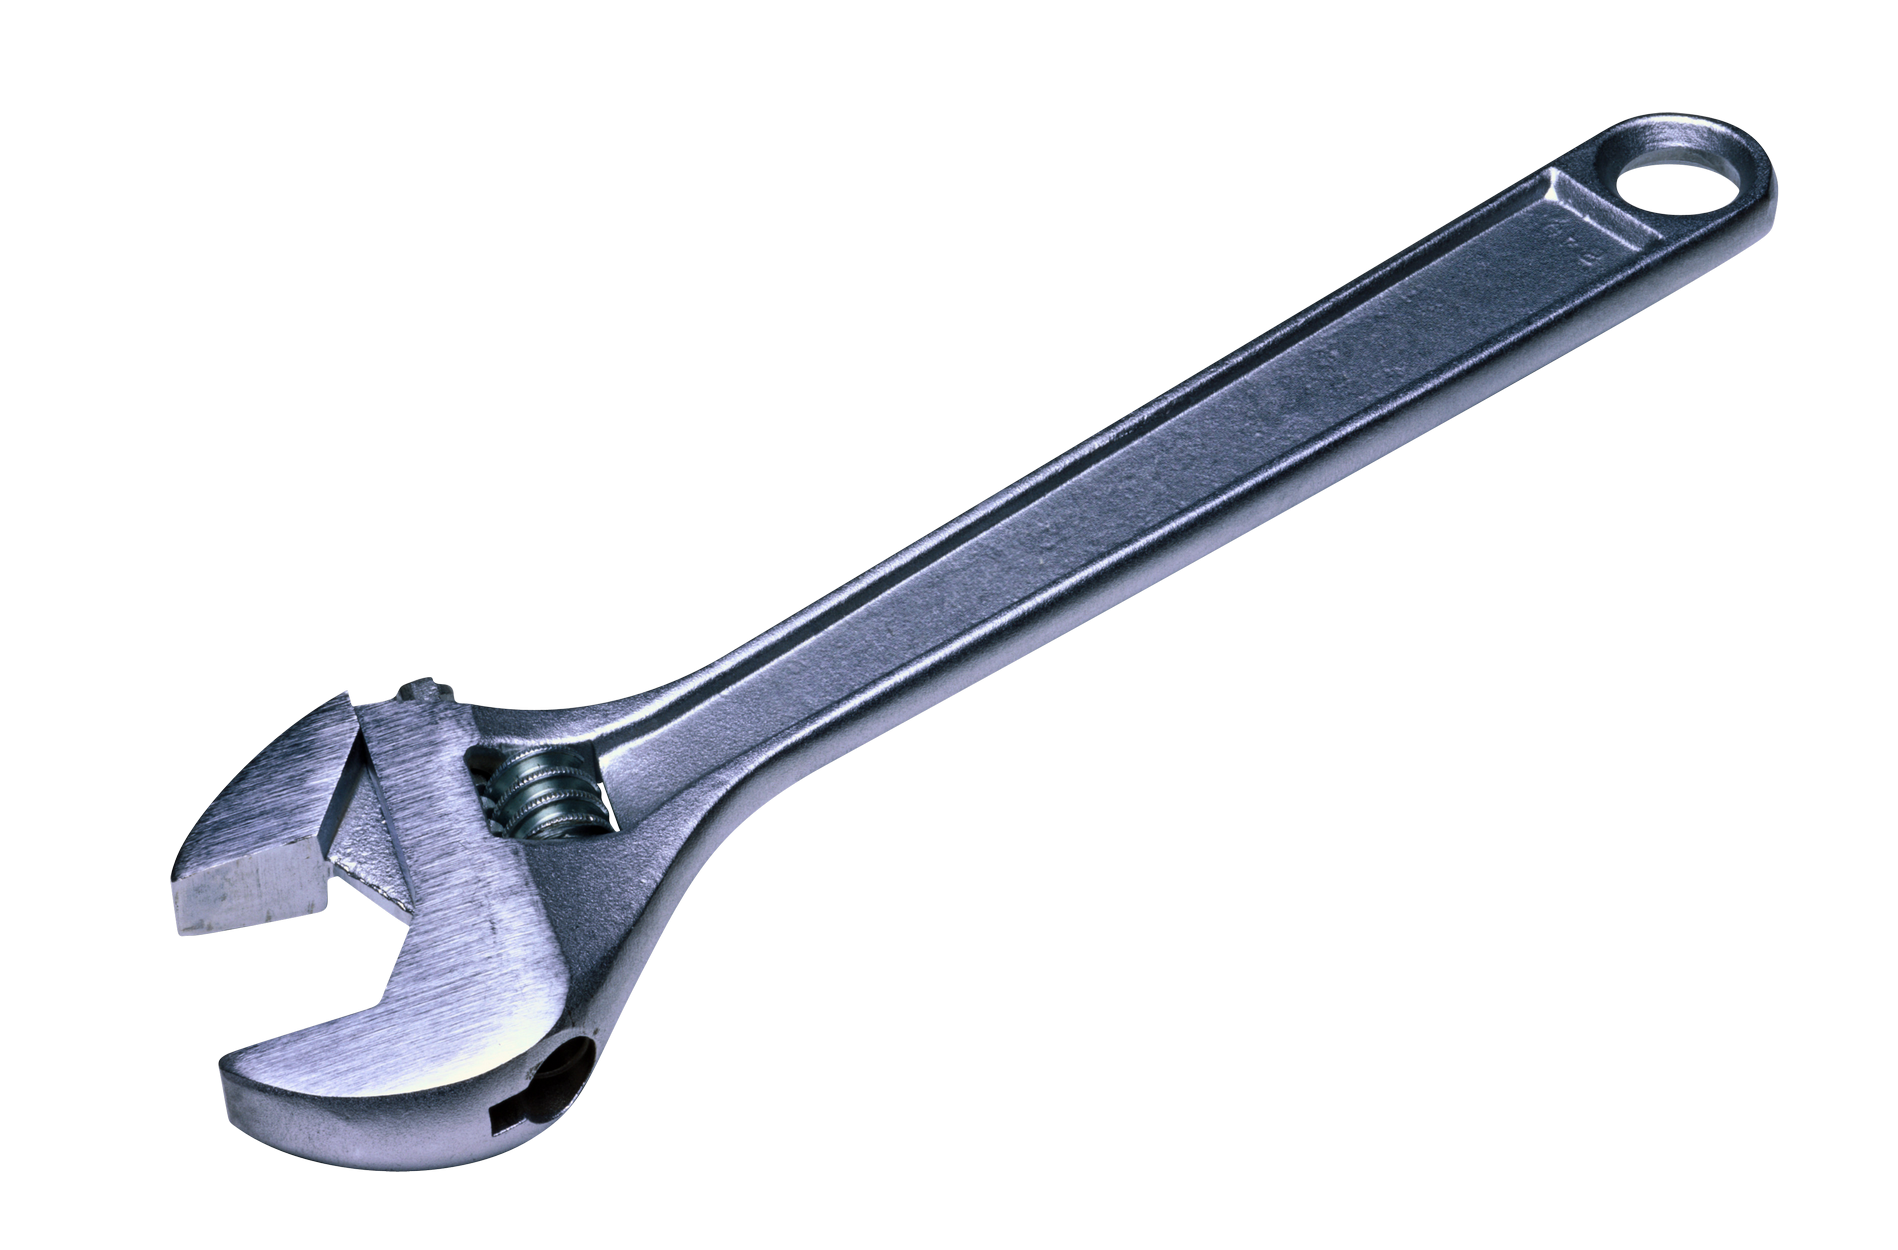 Wrench PNG Best Image pngteam.com